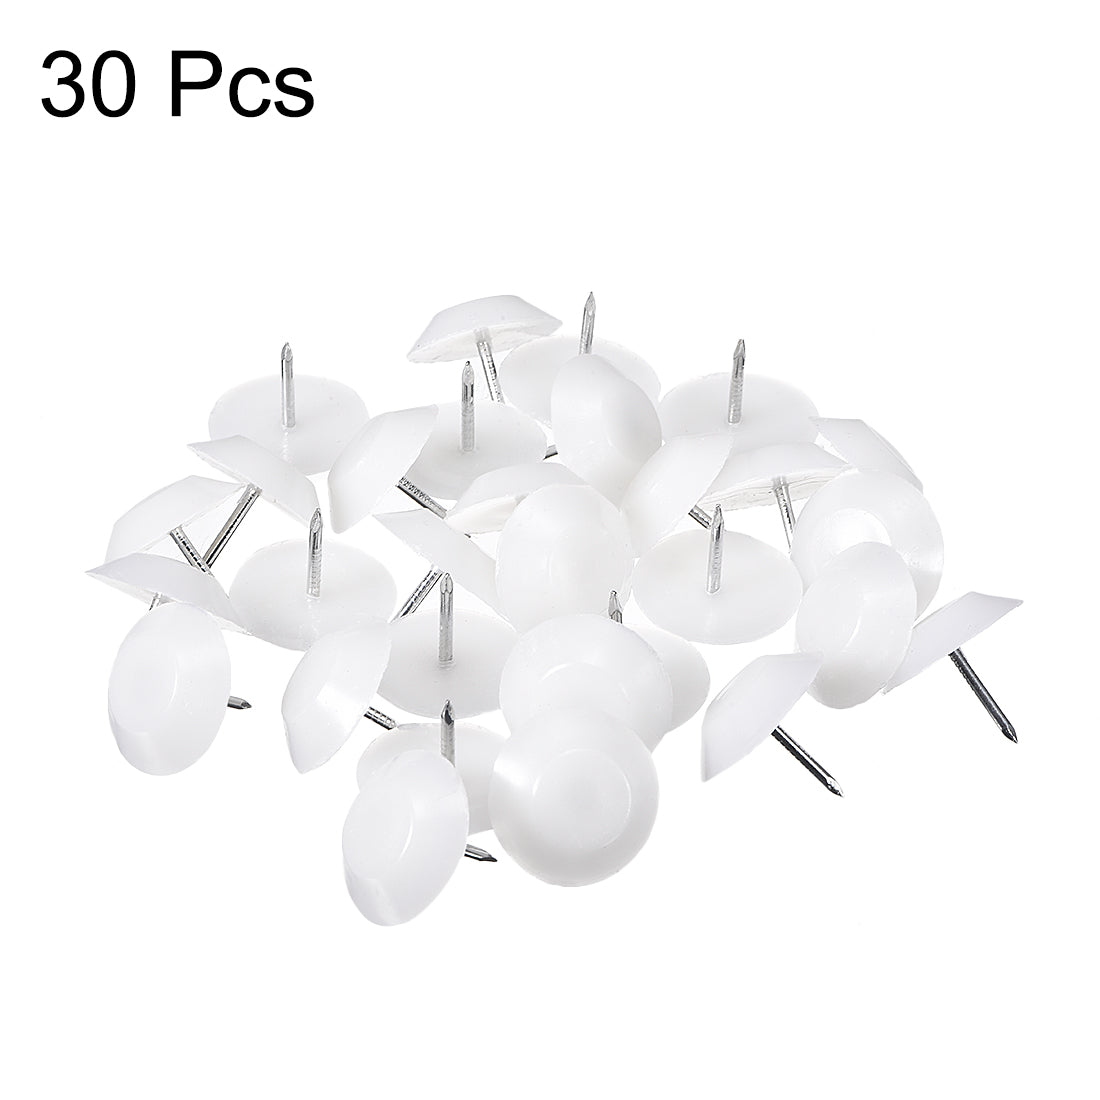 uxcell Uxcell Furniture Feet Nail Chair Table Leg Protector 22mm Dia White Plastic 30pcs